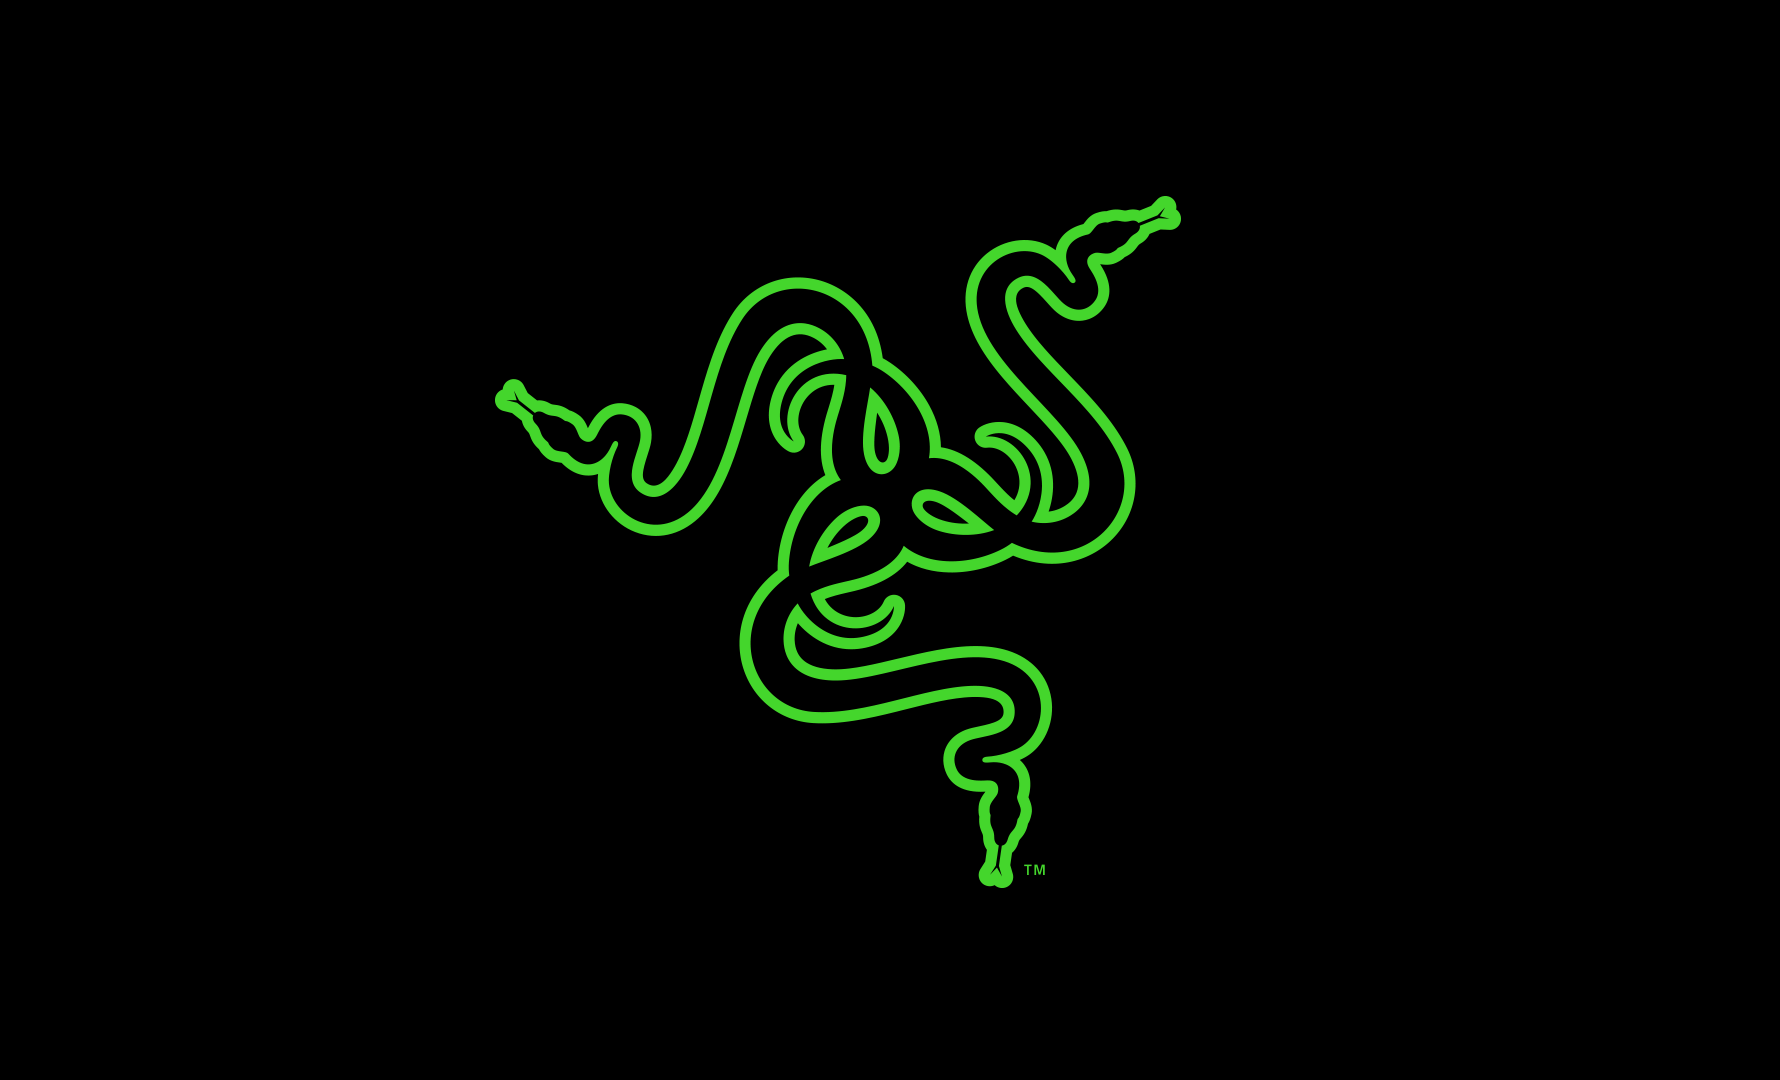 Razer exposed personal details of 100,000 customers: Report